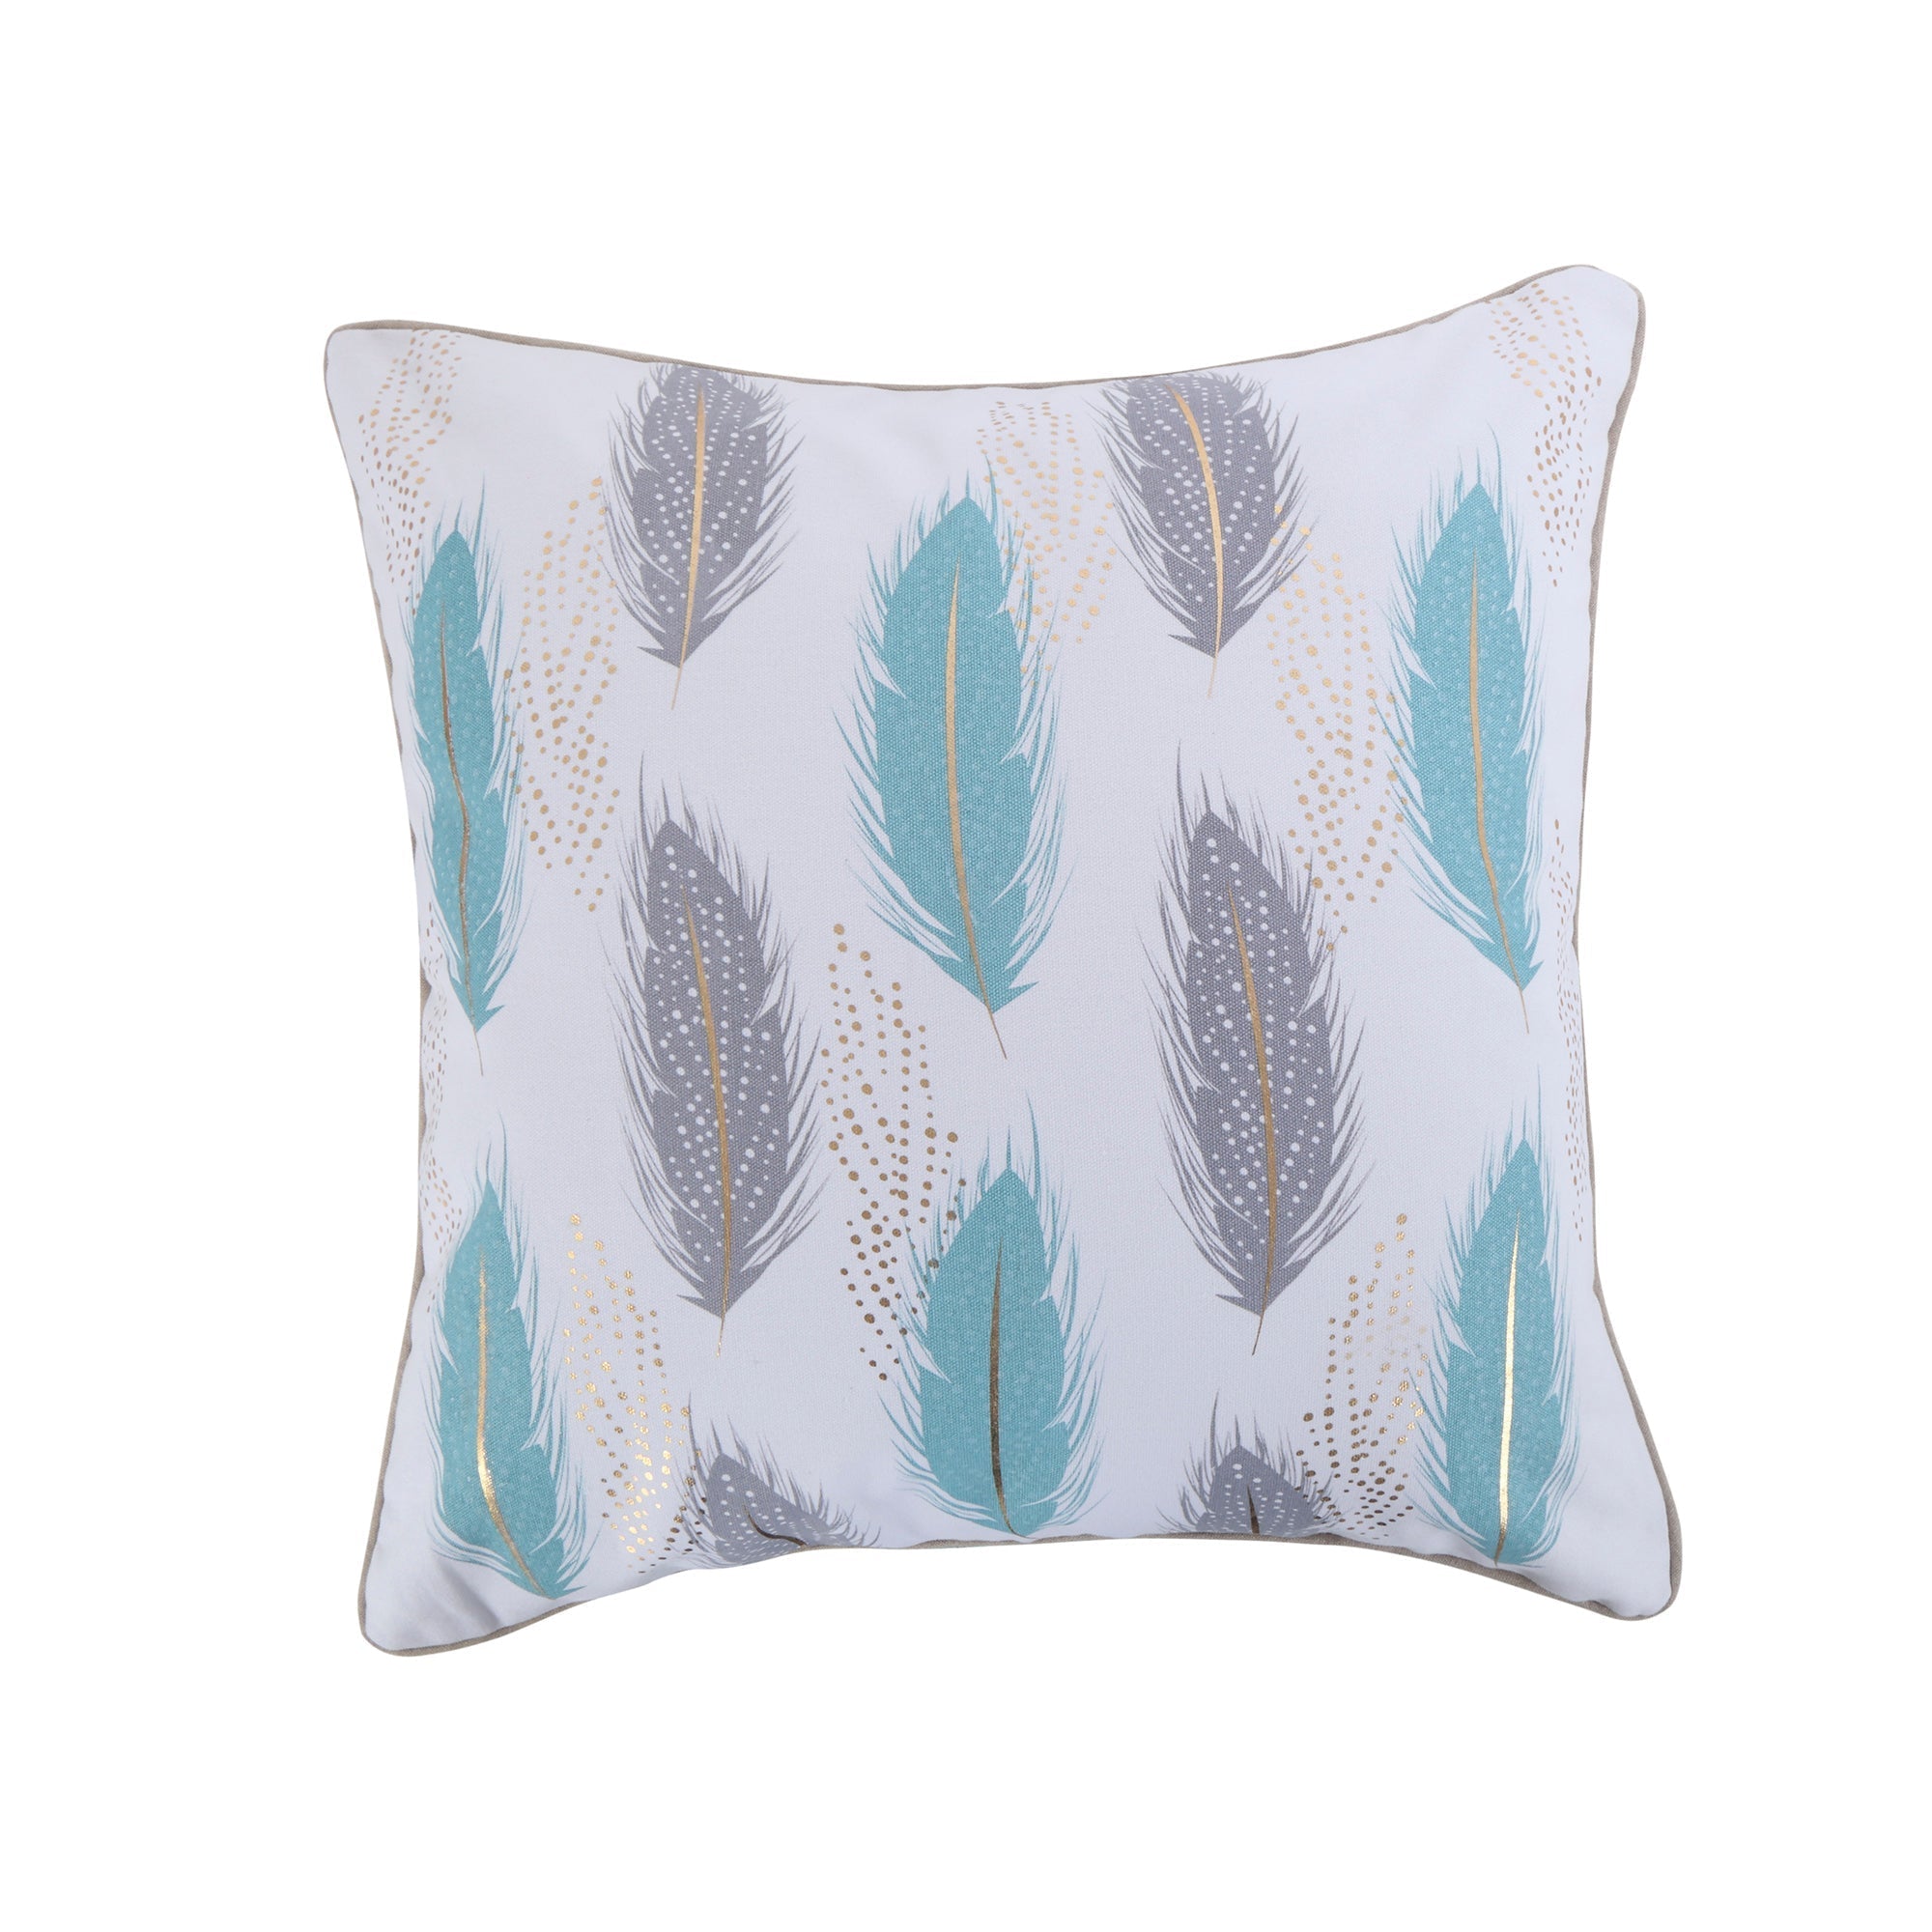 Spa Pintuck Teal Gray Feathers Pillow